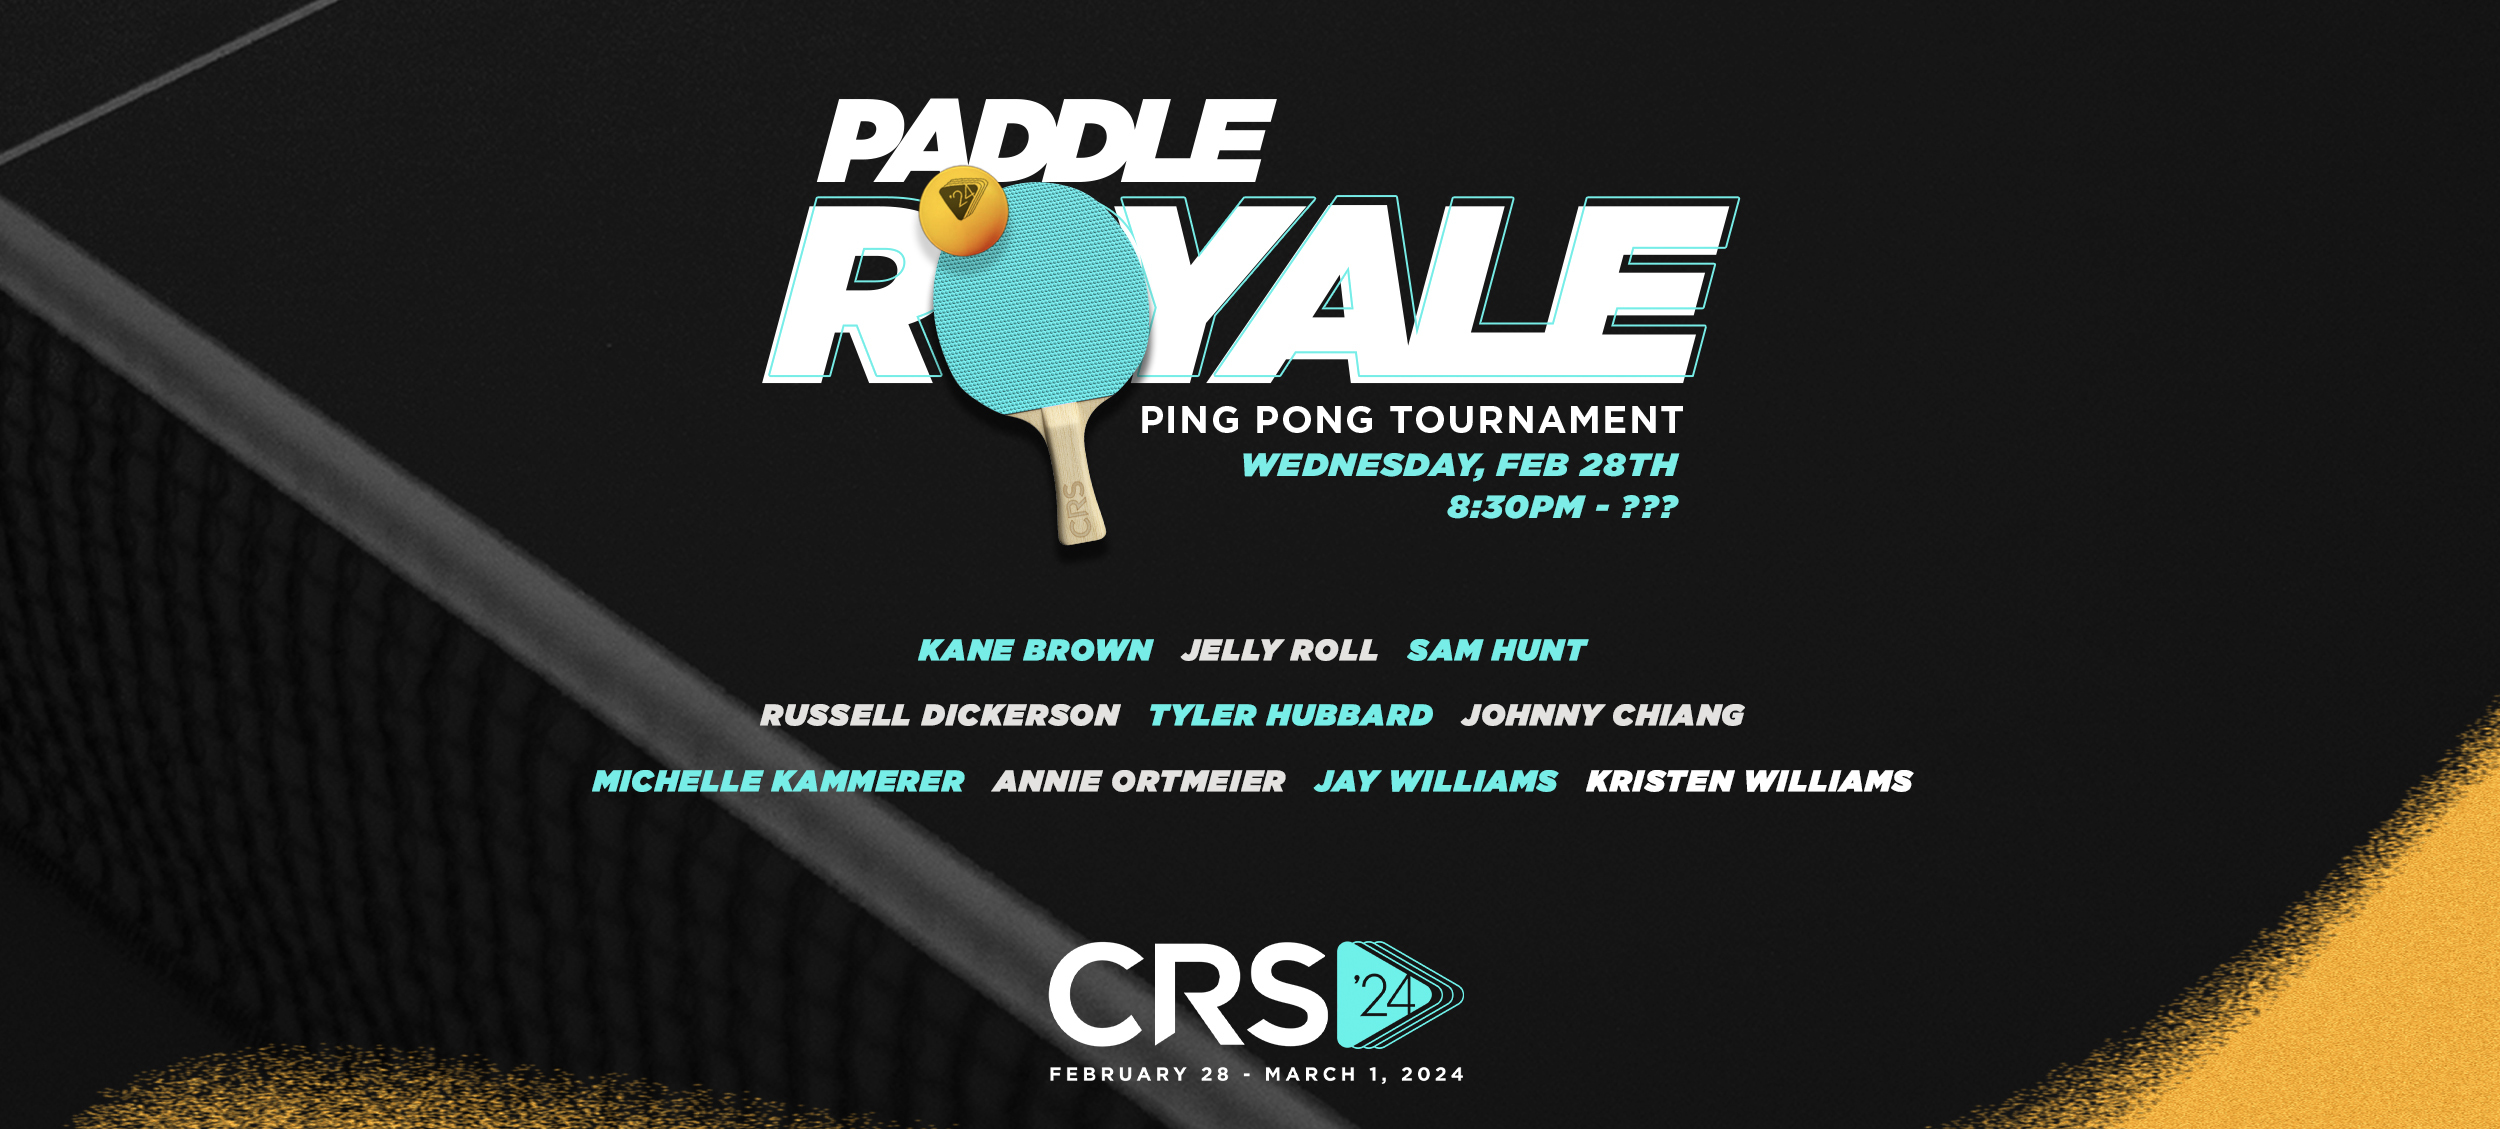 Kane Brown, Jelly Roll, More Set For CRS Paddle Royale Ping Pong Tournament